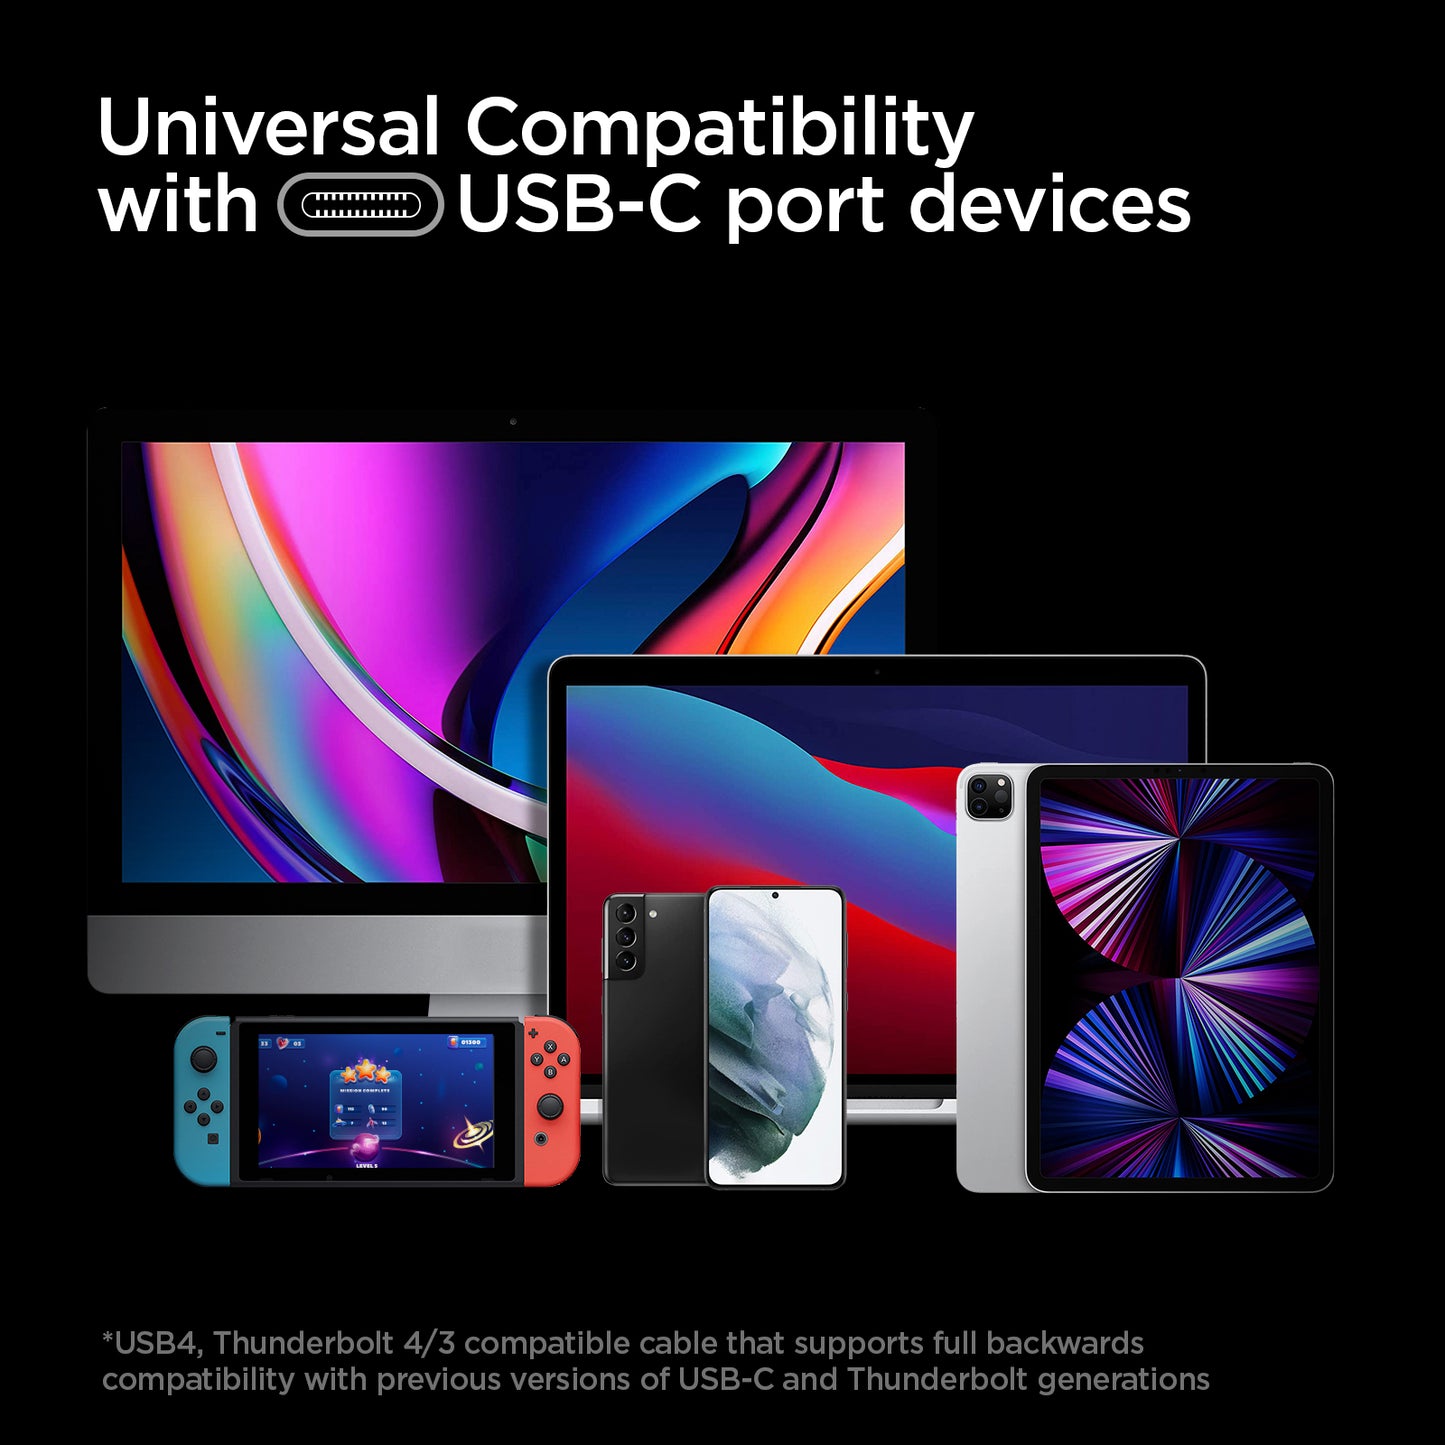 ACA02201 - ArcWire™ USB-C to USB-C 4 Cable PB2000 in Black showing the Universal Compatibility with USB-C port devices. USB4, Thunderbolt 4/3 compatible cable that supports full backwards compatibility with previous versions of USB-C and Thunderbolt generations. Showing Multiple devices.